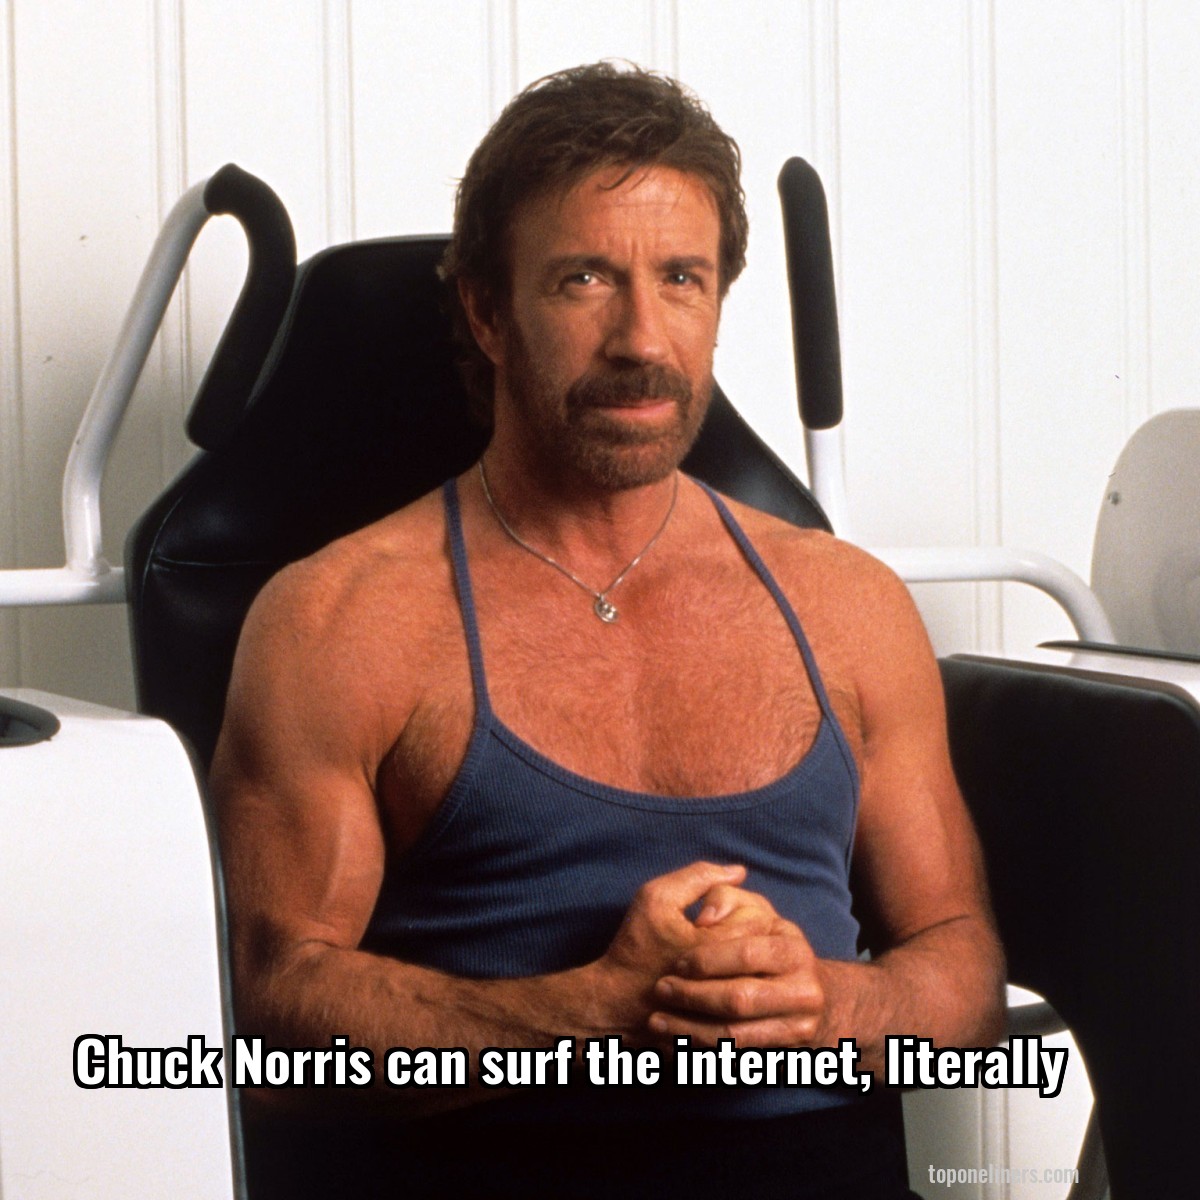 Chuck Norris can surf the internet, literally